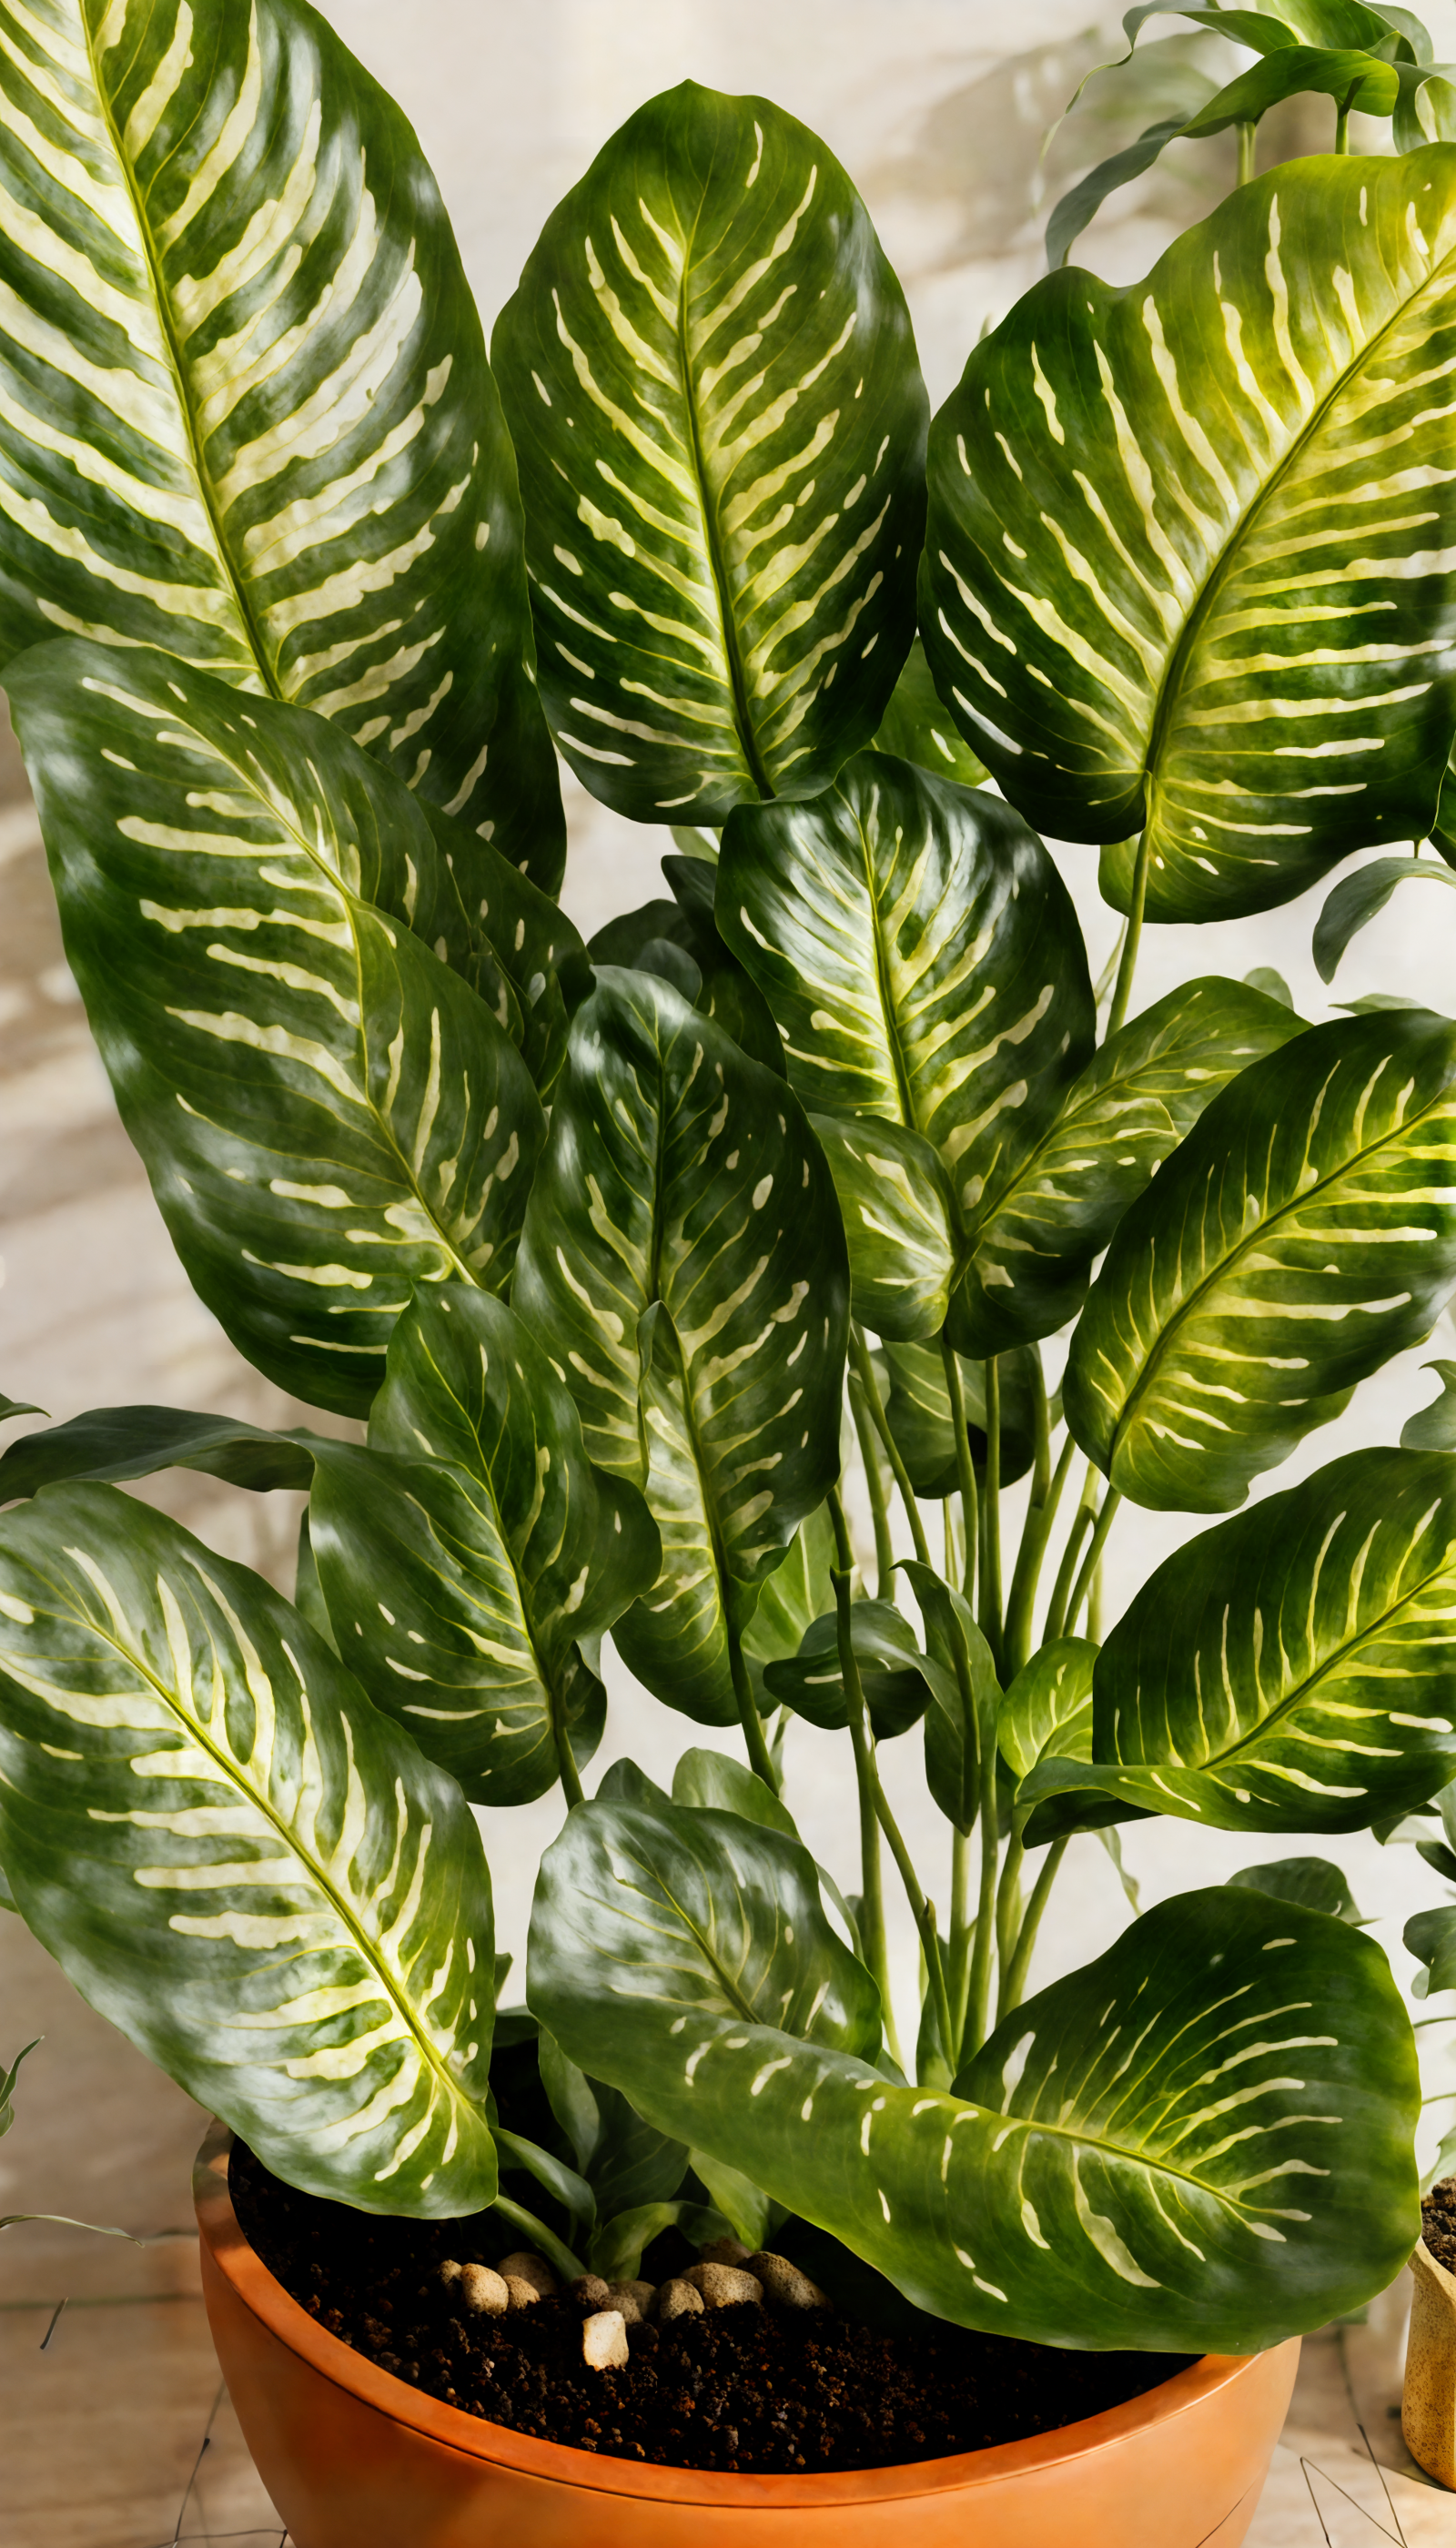 Dieffenbachia seguine in a bowl planter, with clear lighting, as part of a hyper-realistic indoor decor.